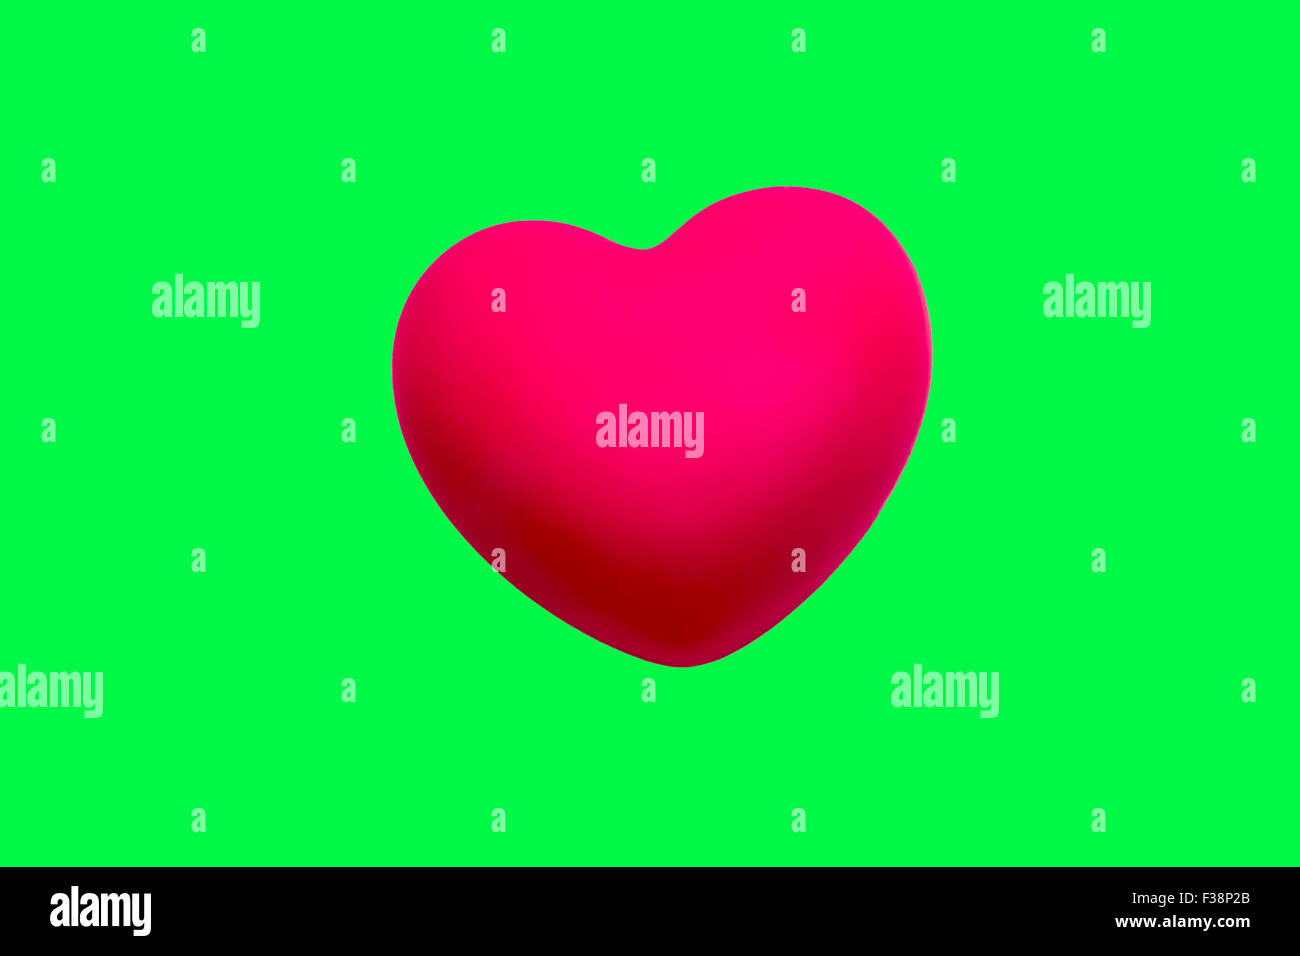 pink heart Isolated on green screen chroma key background. Stock Photo